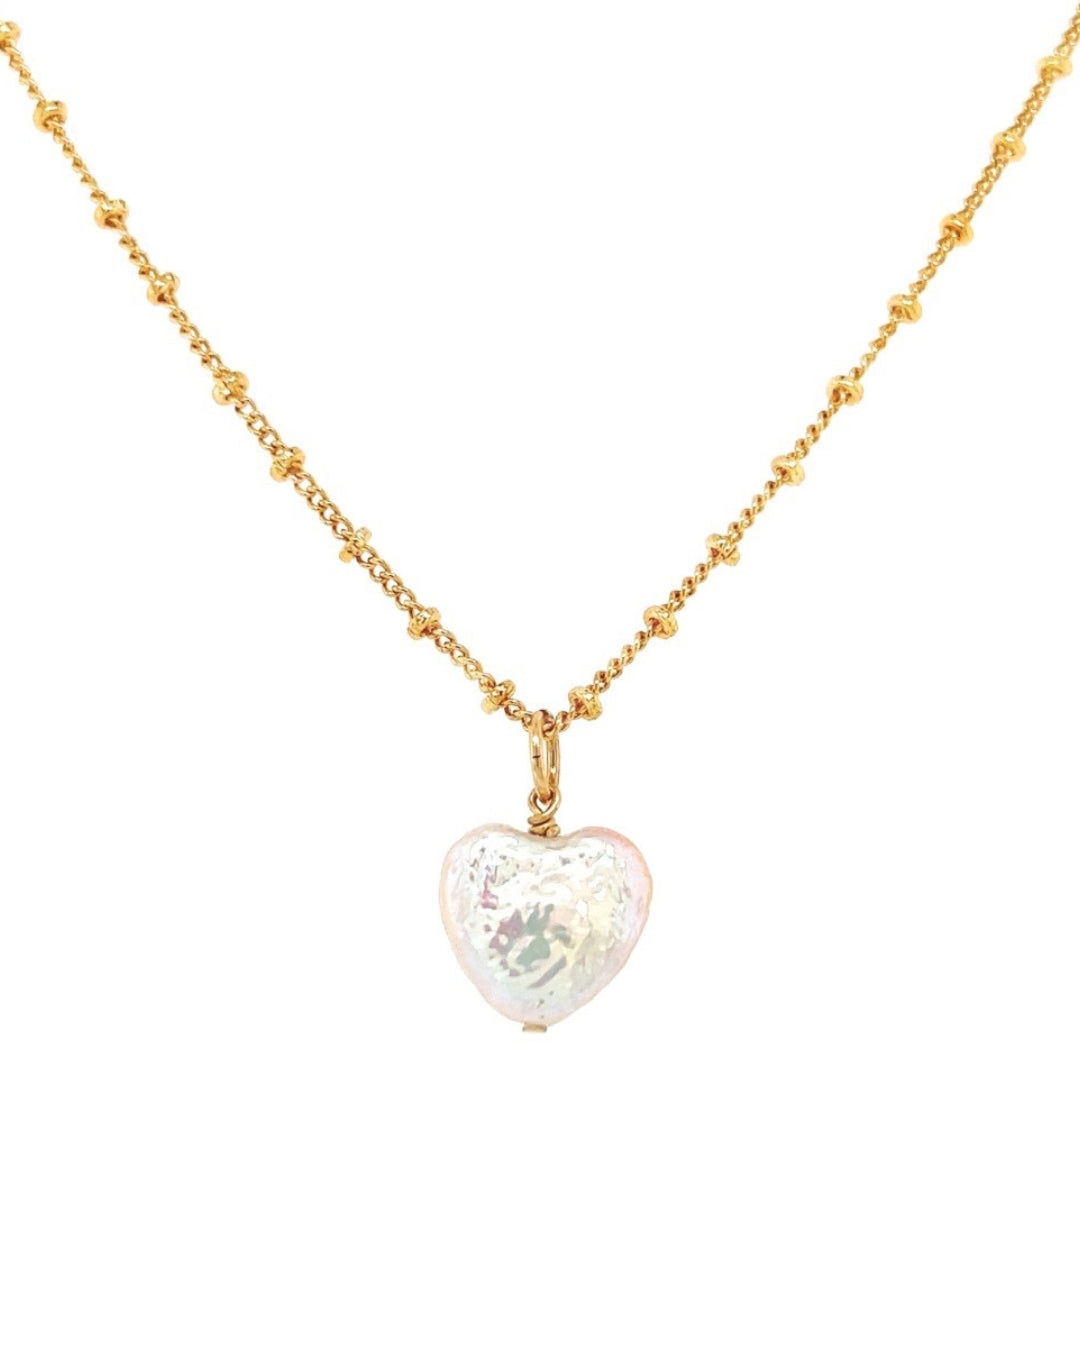 Freshwater Pearl Heart Pendant on Gold Filled Necklace Chain 